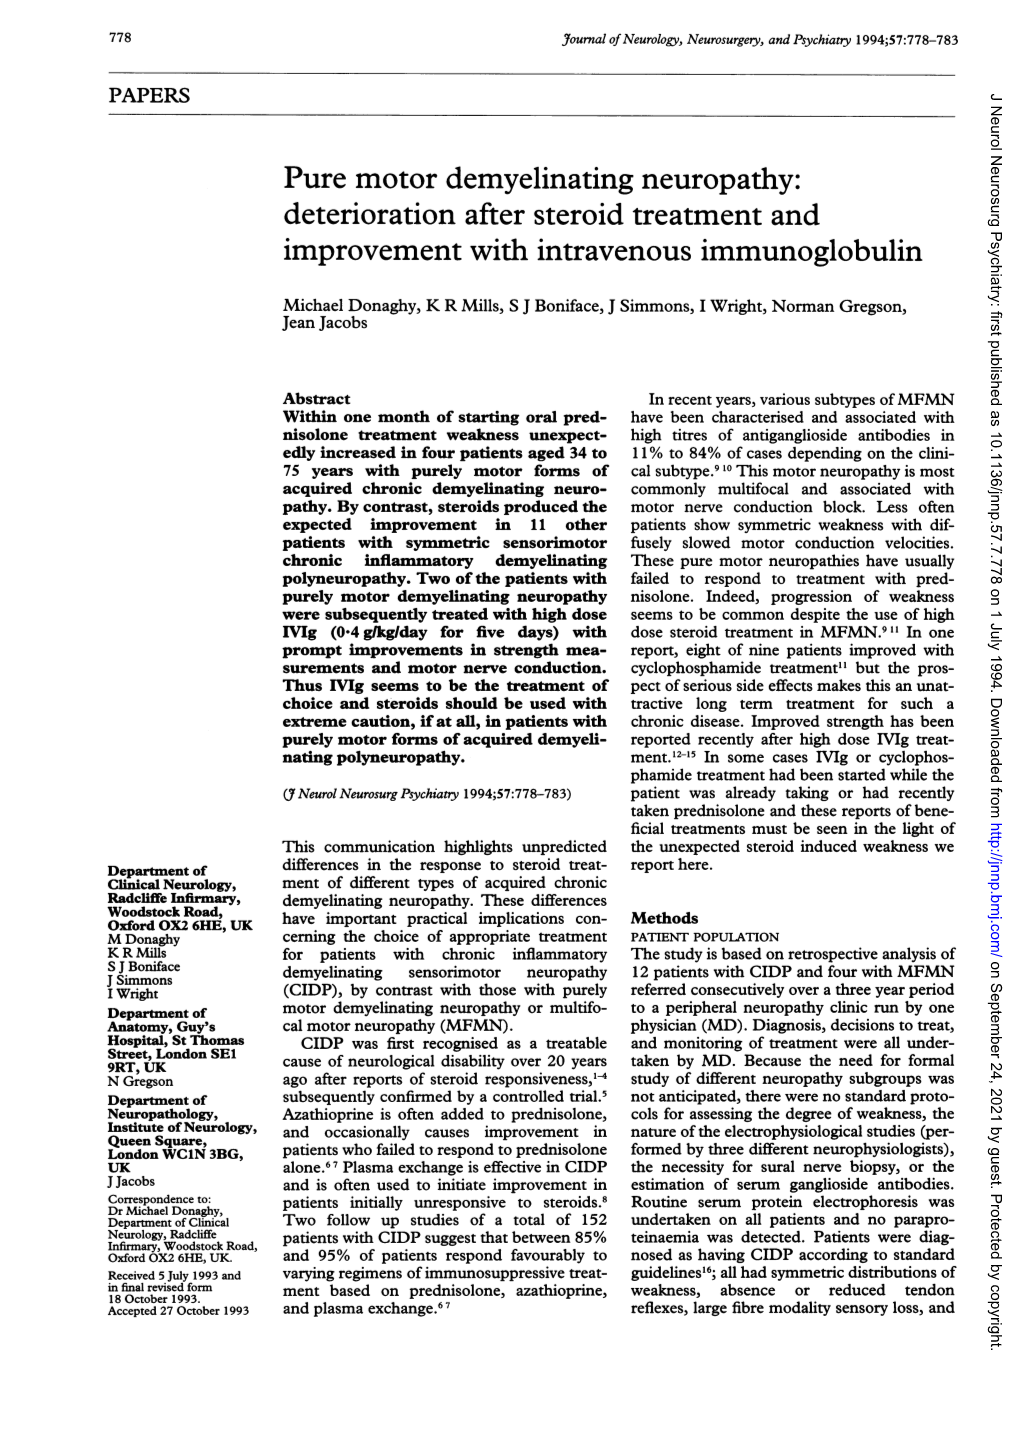 Pure Motor Demyelinating Neuropathy: Deterioration After Steroid Treatment and Improvement with Intravenous Immunoglobulin